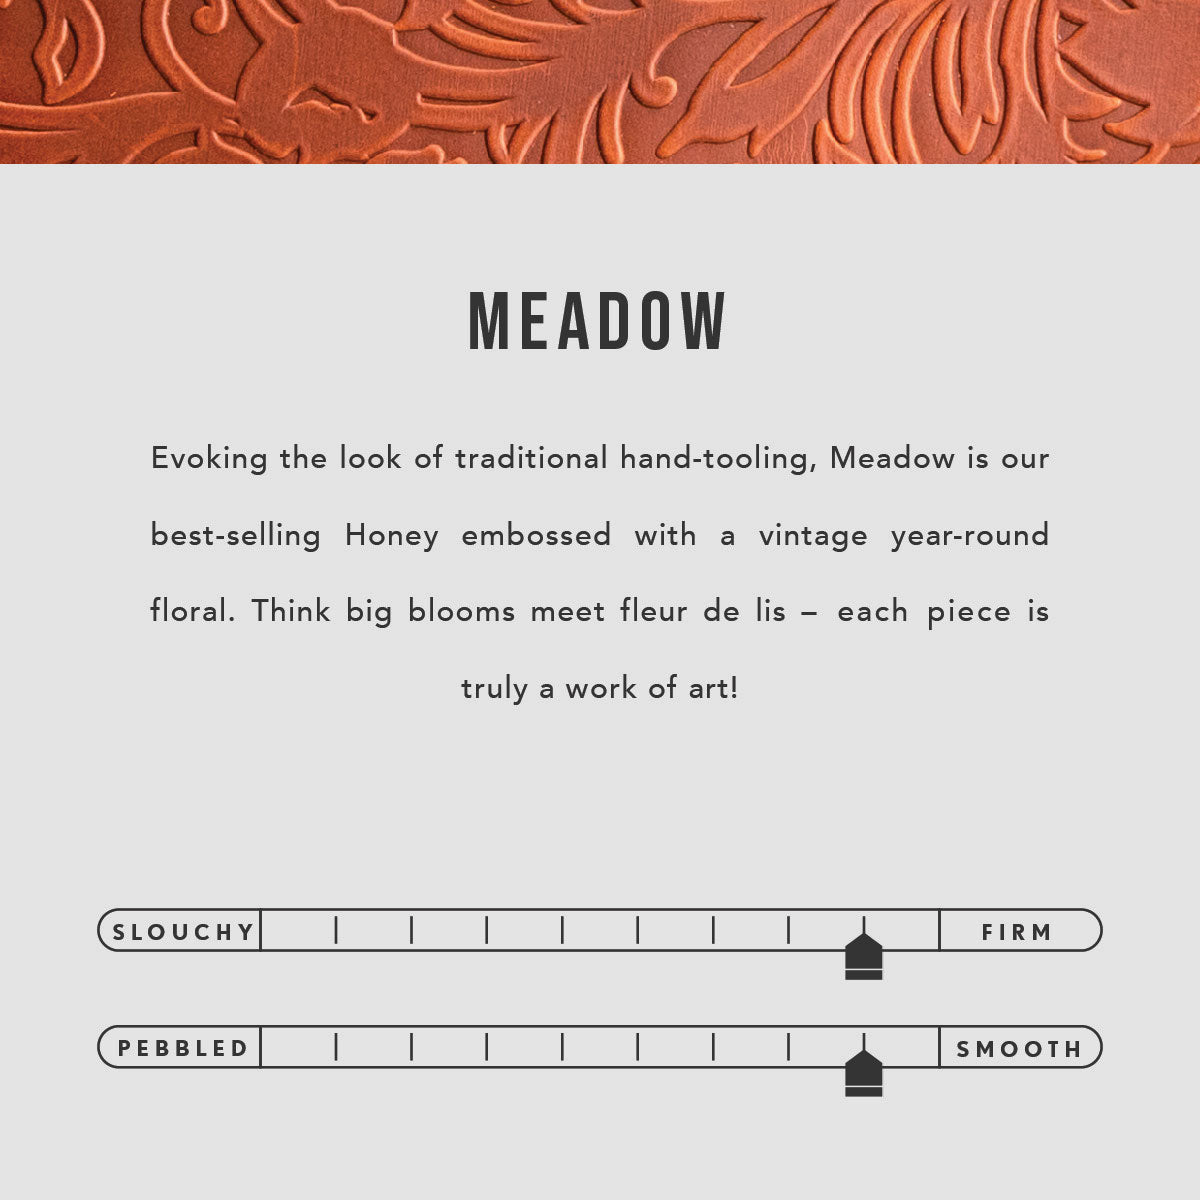 Meadow | infographic